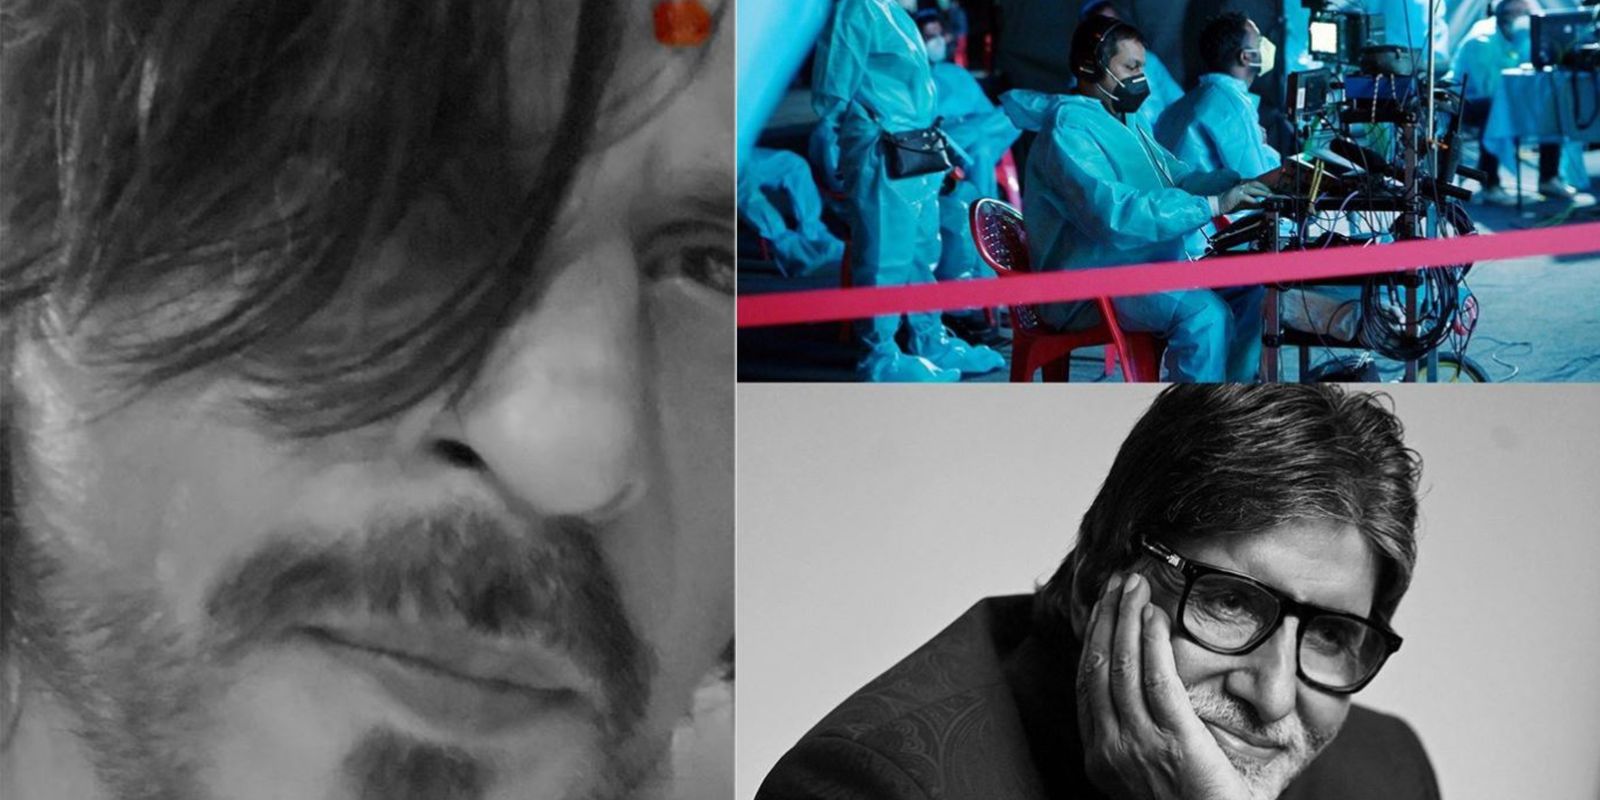 Shah Rukh Khan Shares Monochrome Pic After Ganapati Visarjan, Amitabh Bachchan Is Back To Work With KBC 12